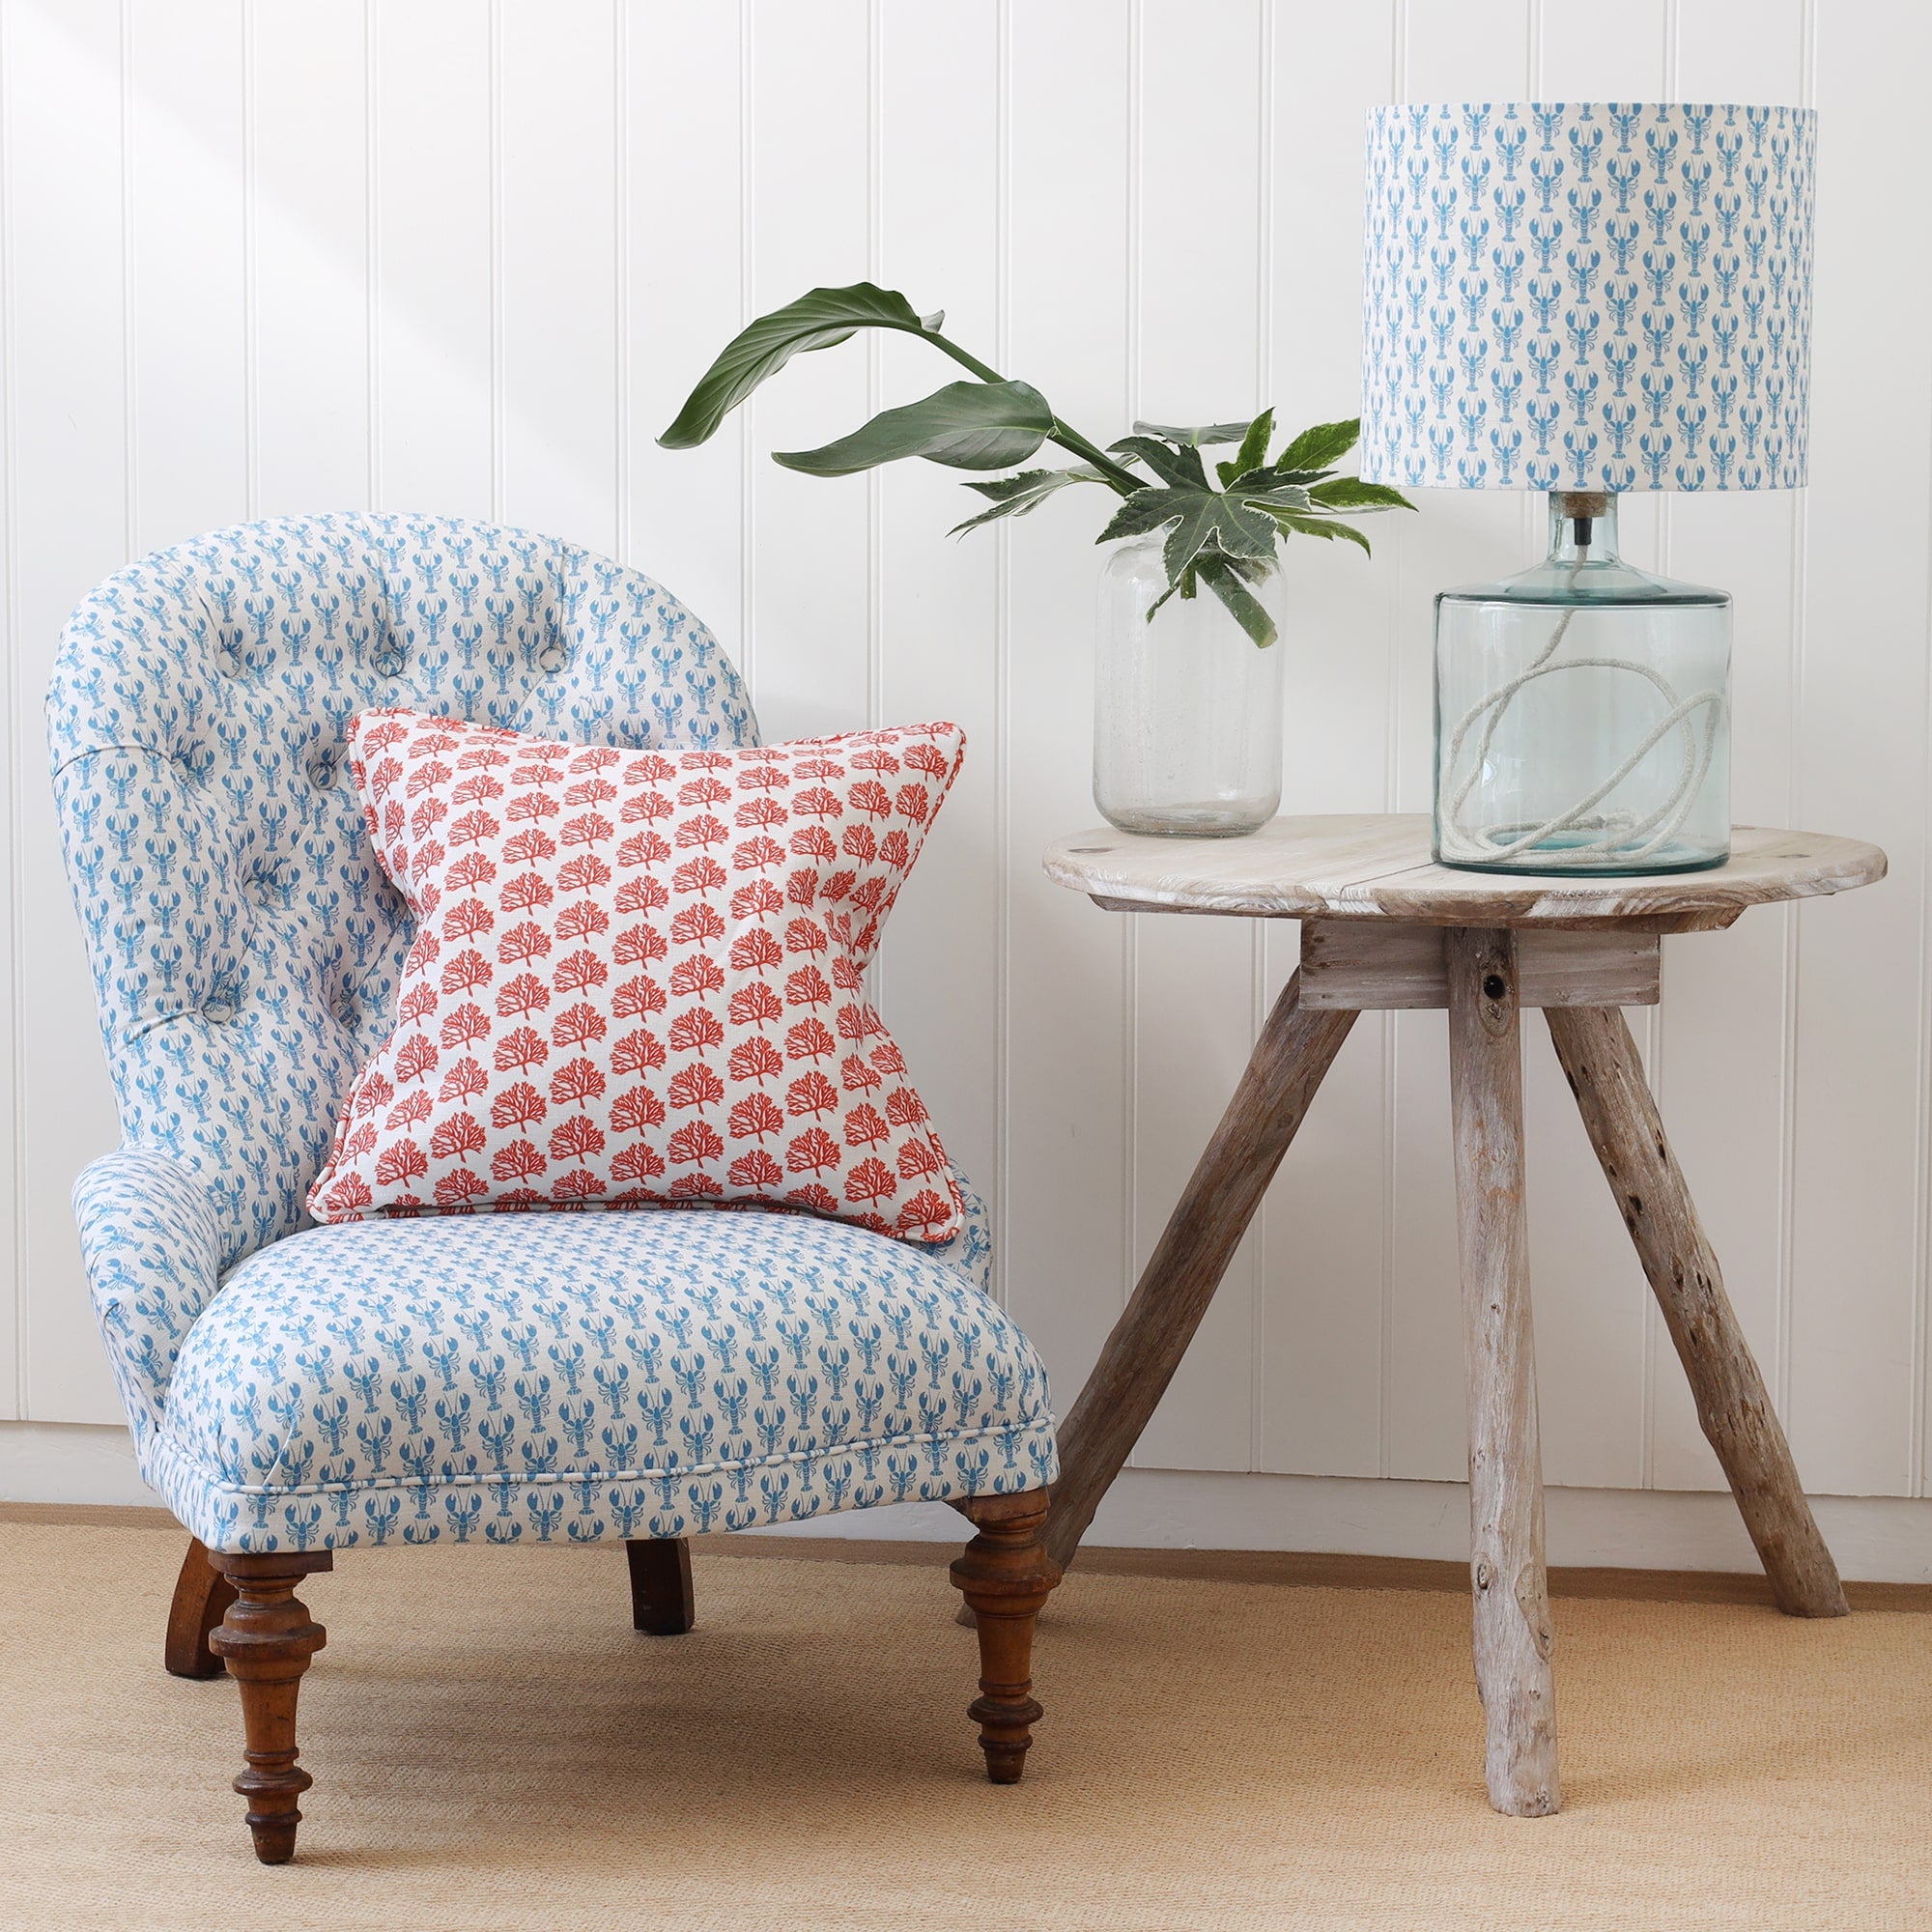 Off white mini coral cushion placed on a chair covered in a mini lobster print in cerulean Blue.next to the chair is a Tripod table with a glass lampbase with a matching mini lobster lampshade.